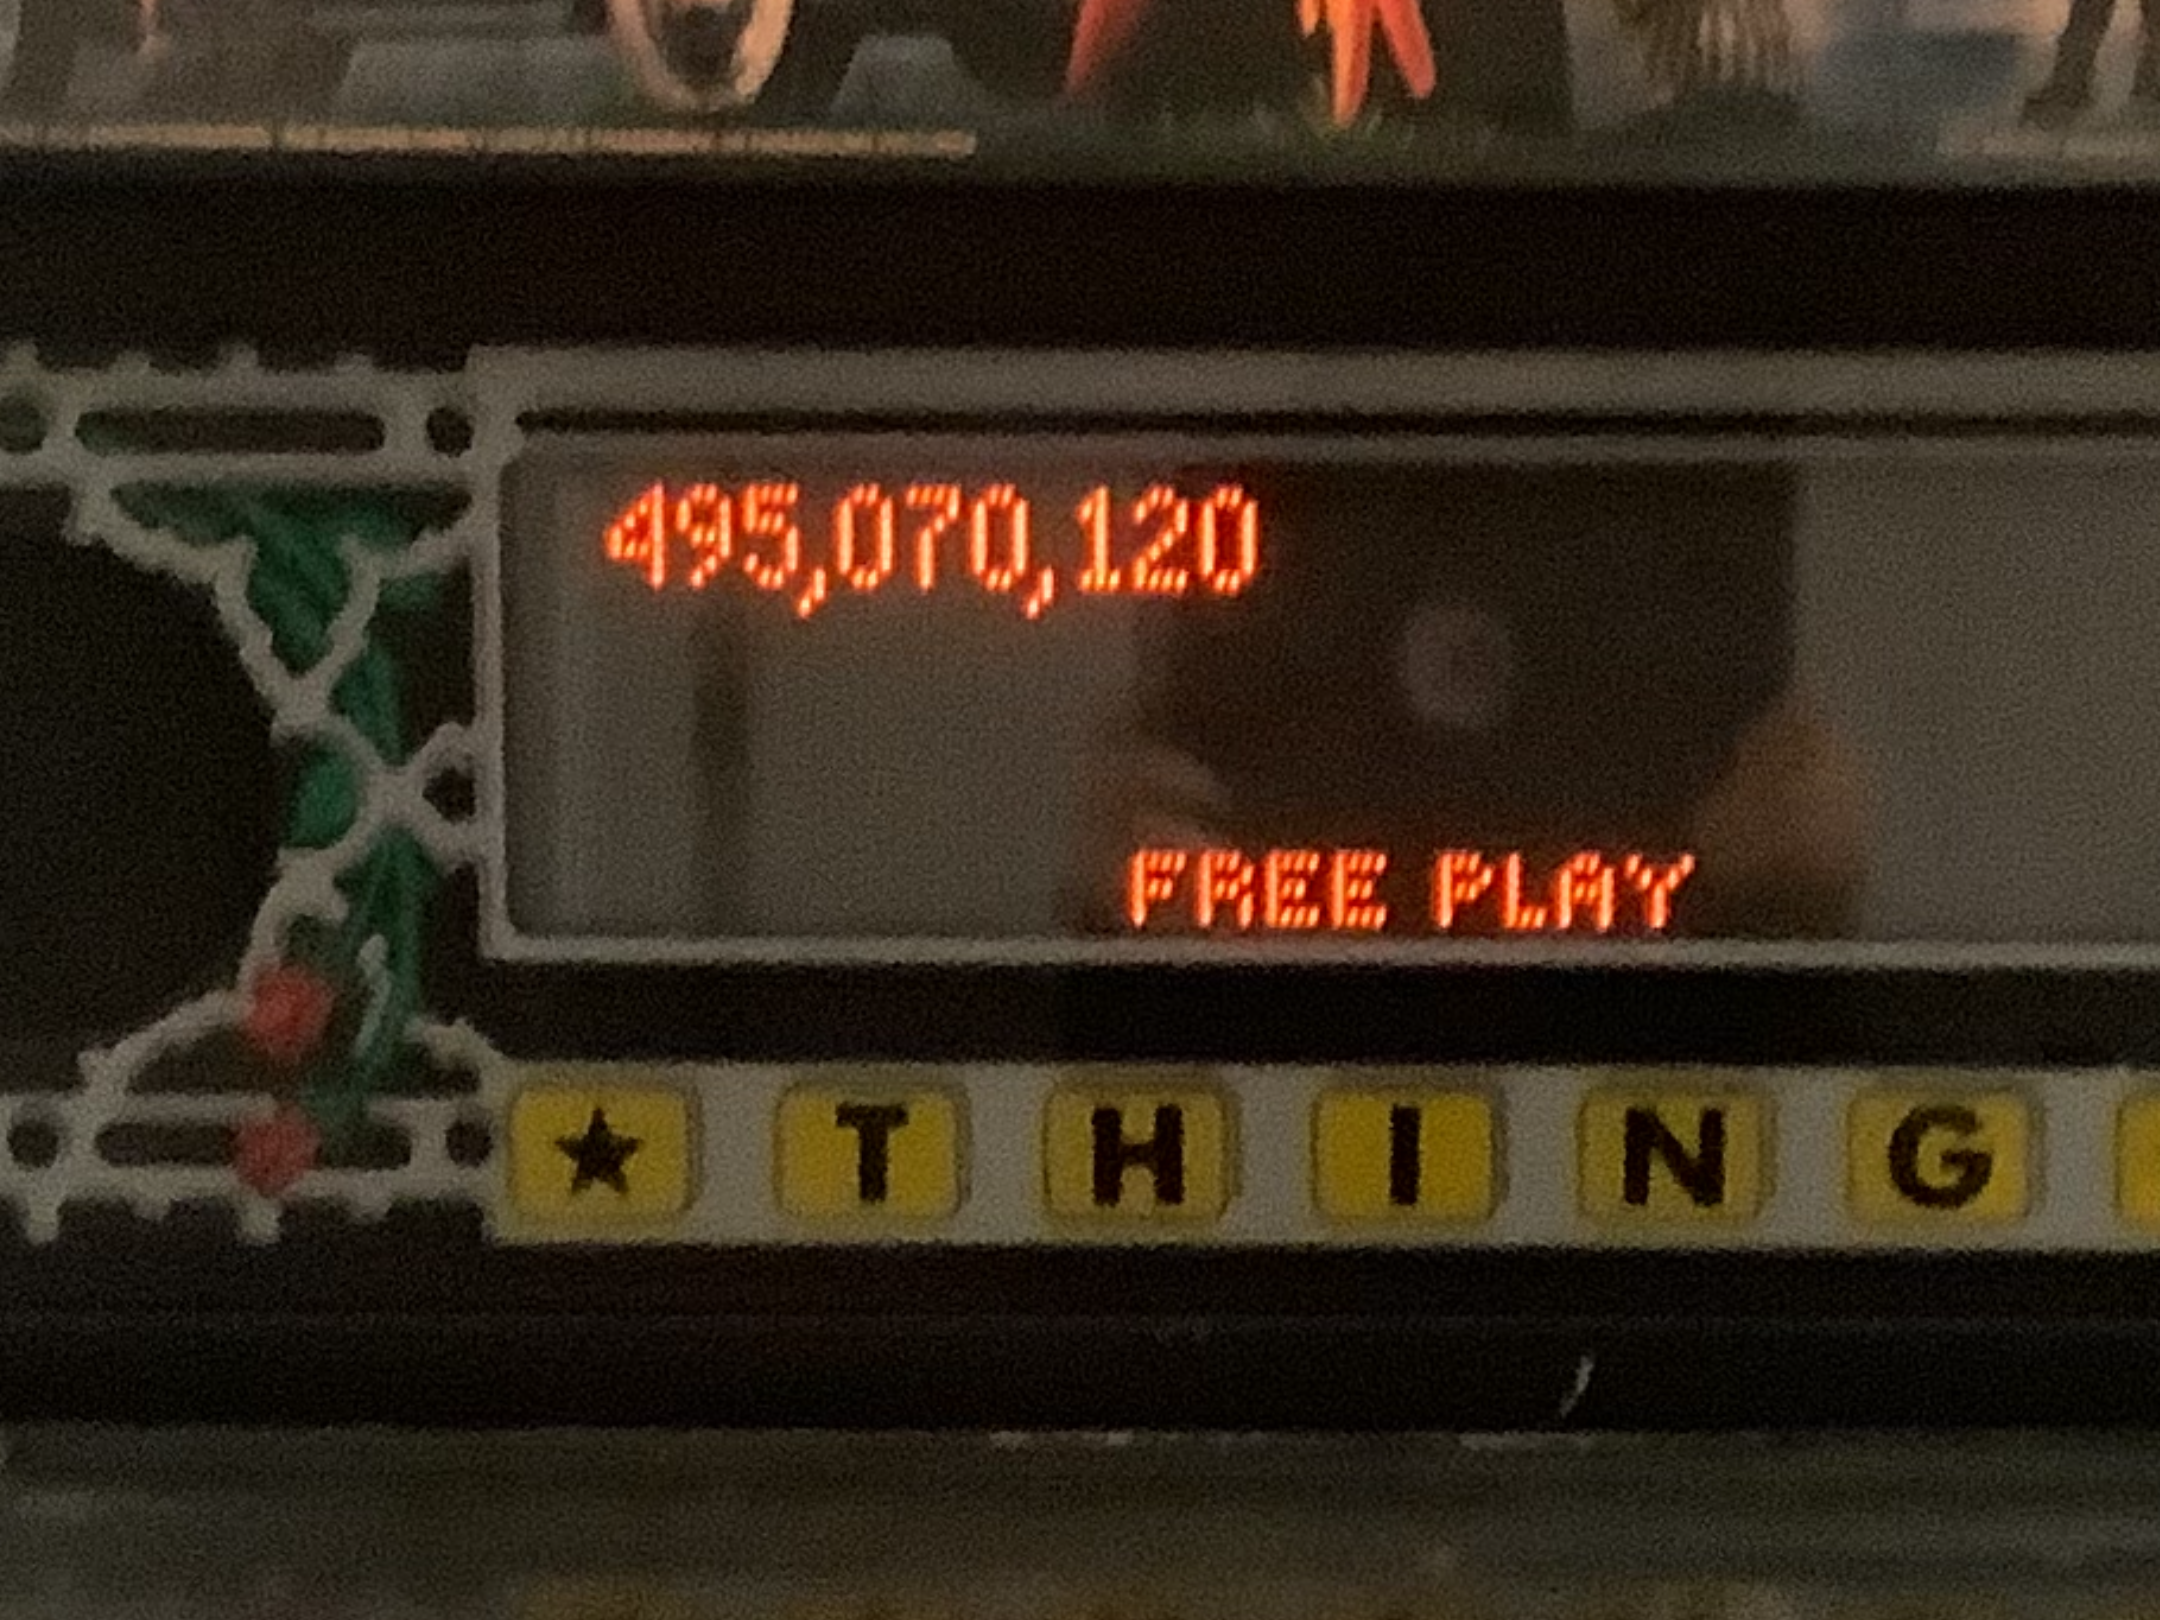 The Addams Family 495,070,120 points